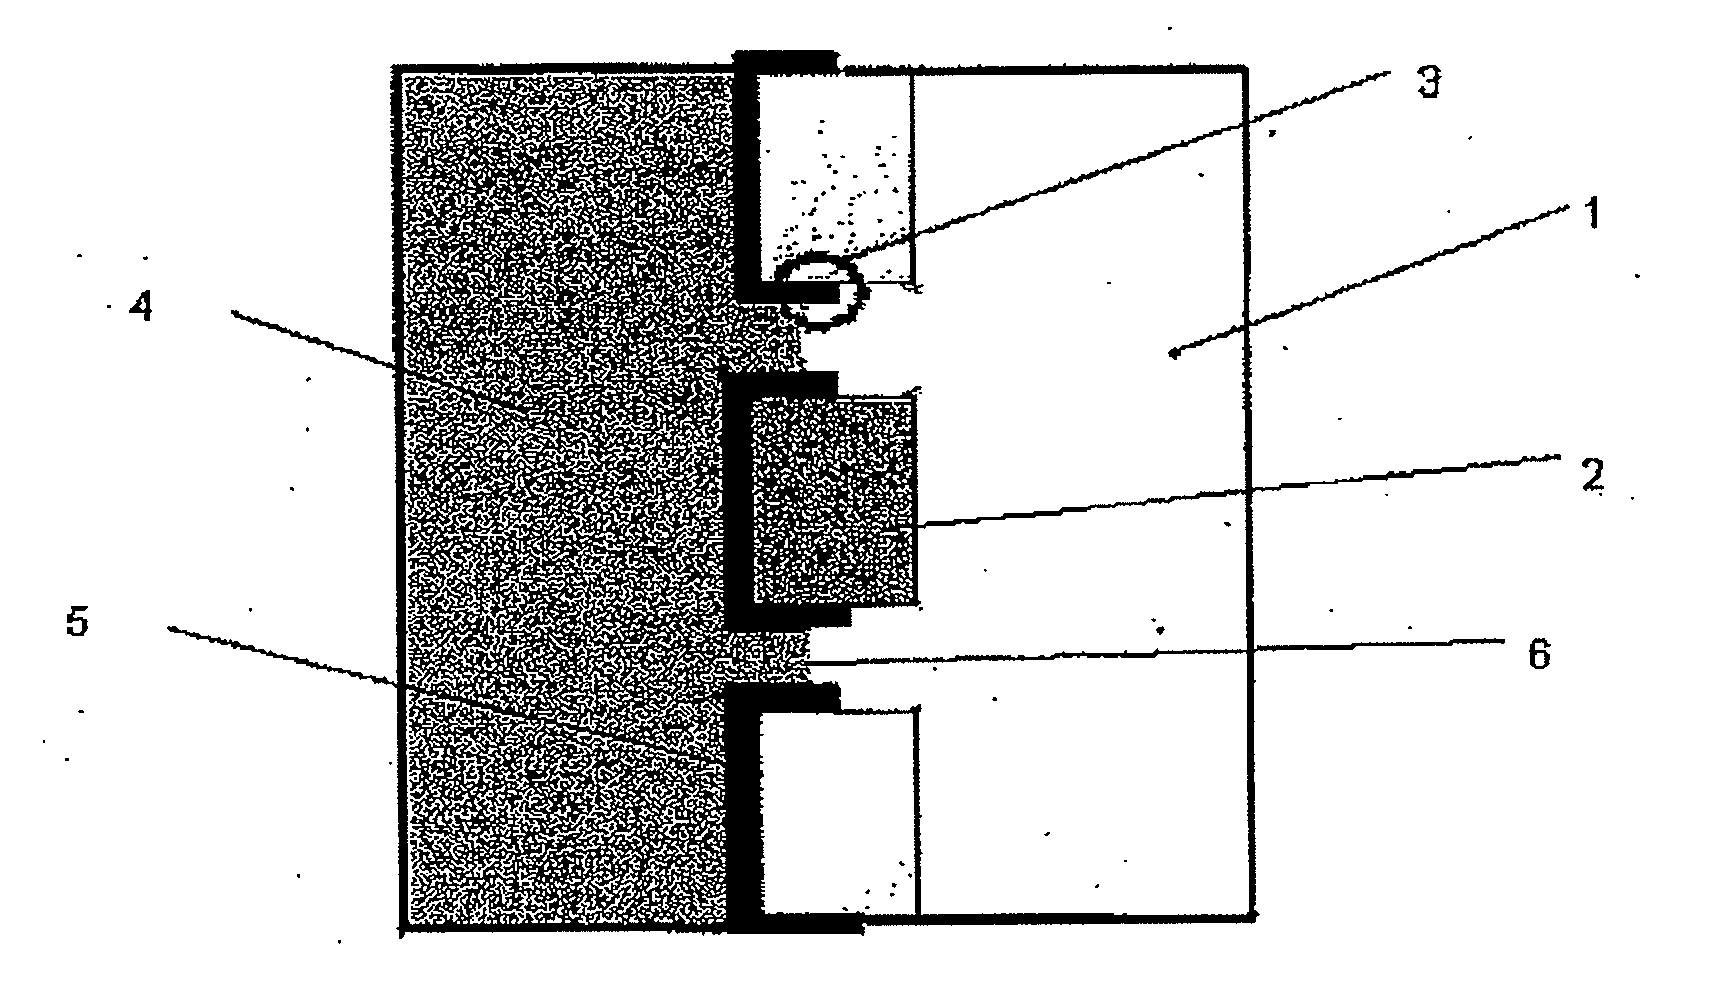 Electrode for electrochemical cells